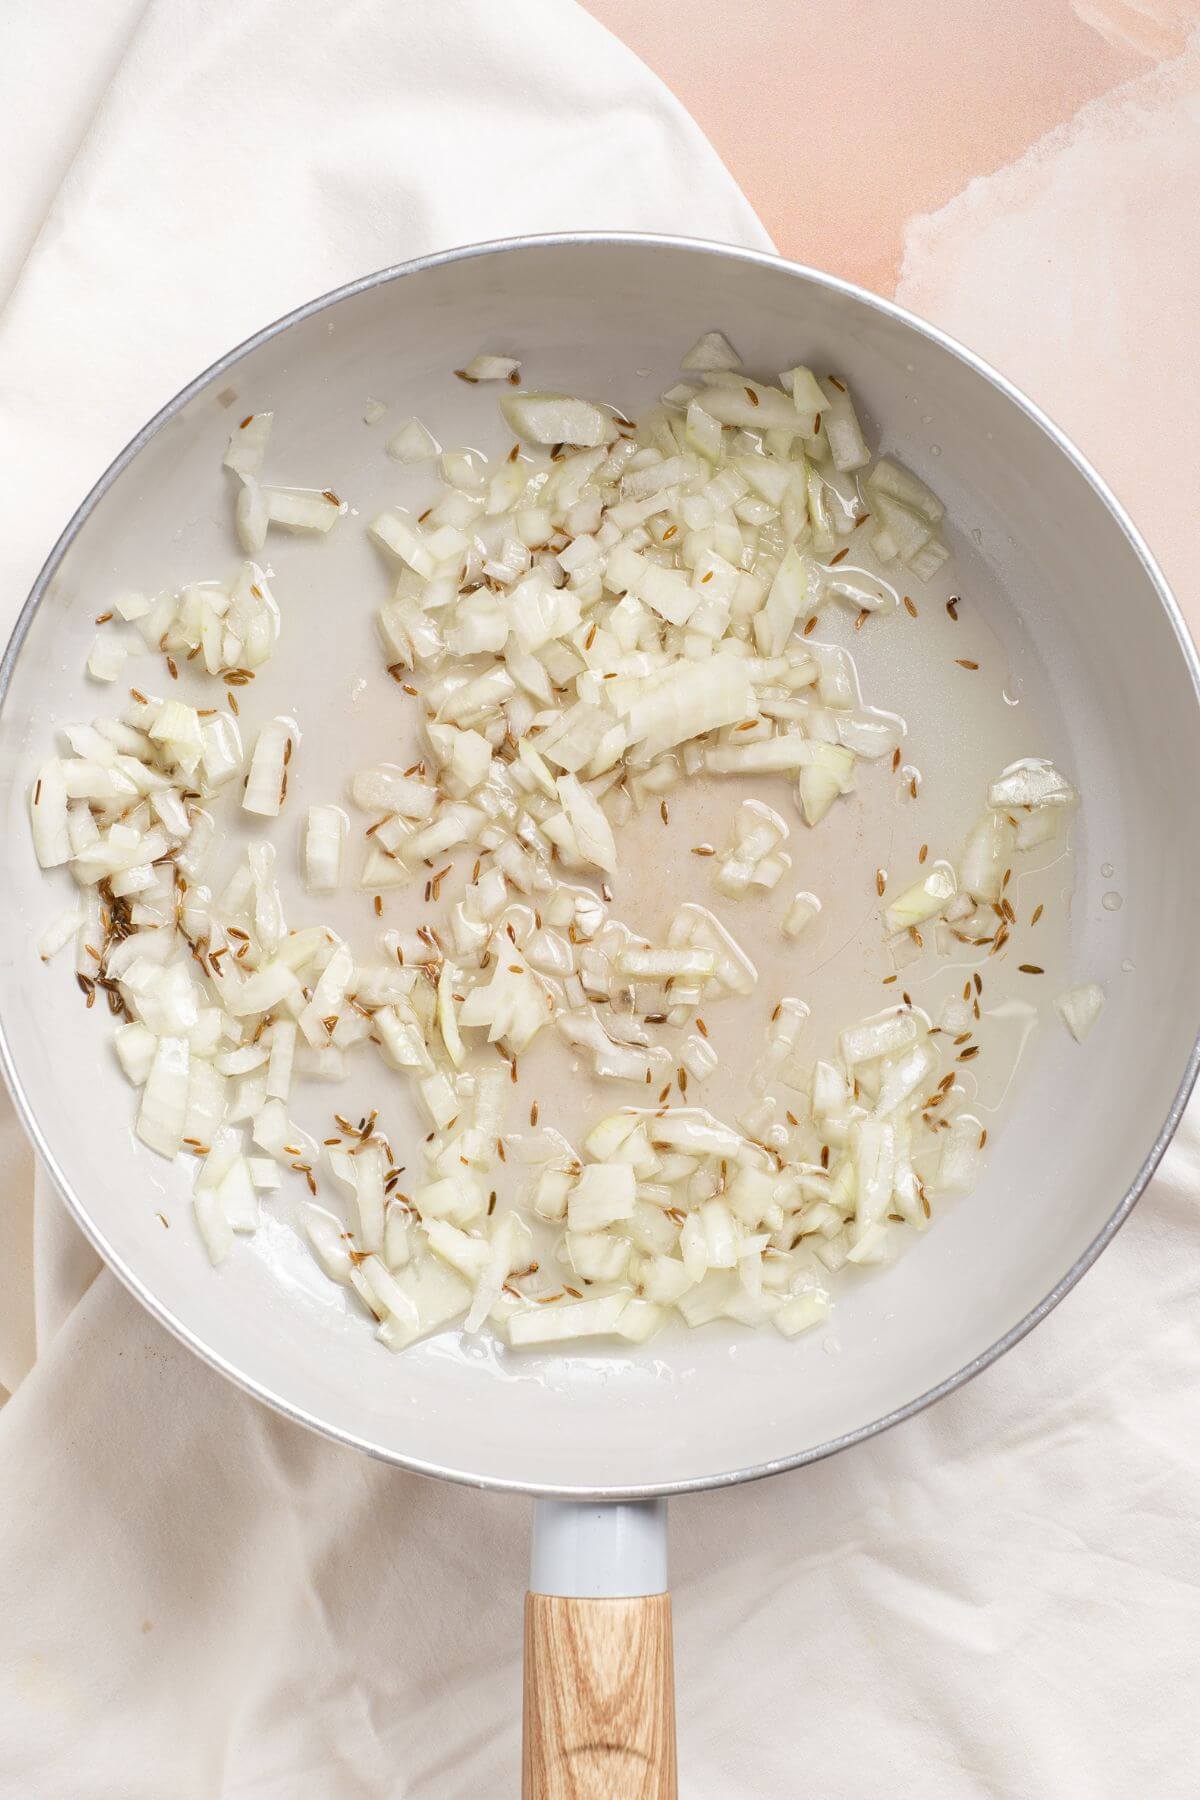 Sautéing onions in skillet with cumin seeds.